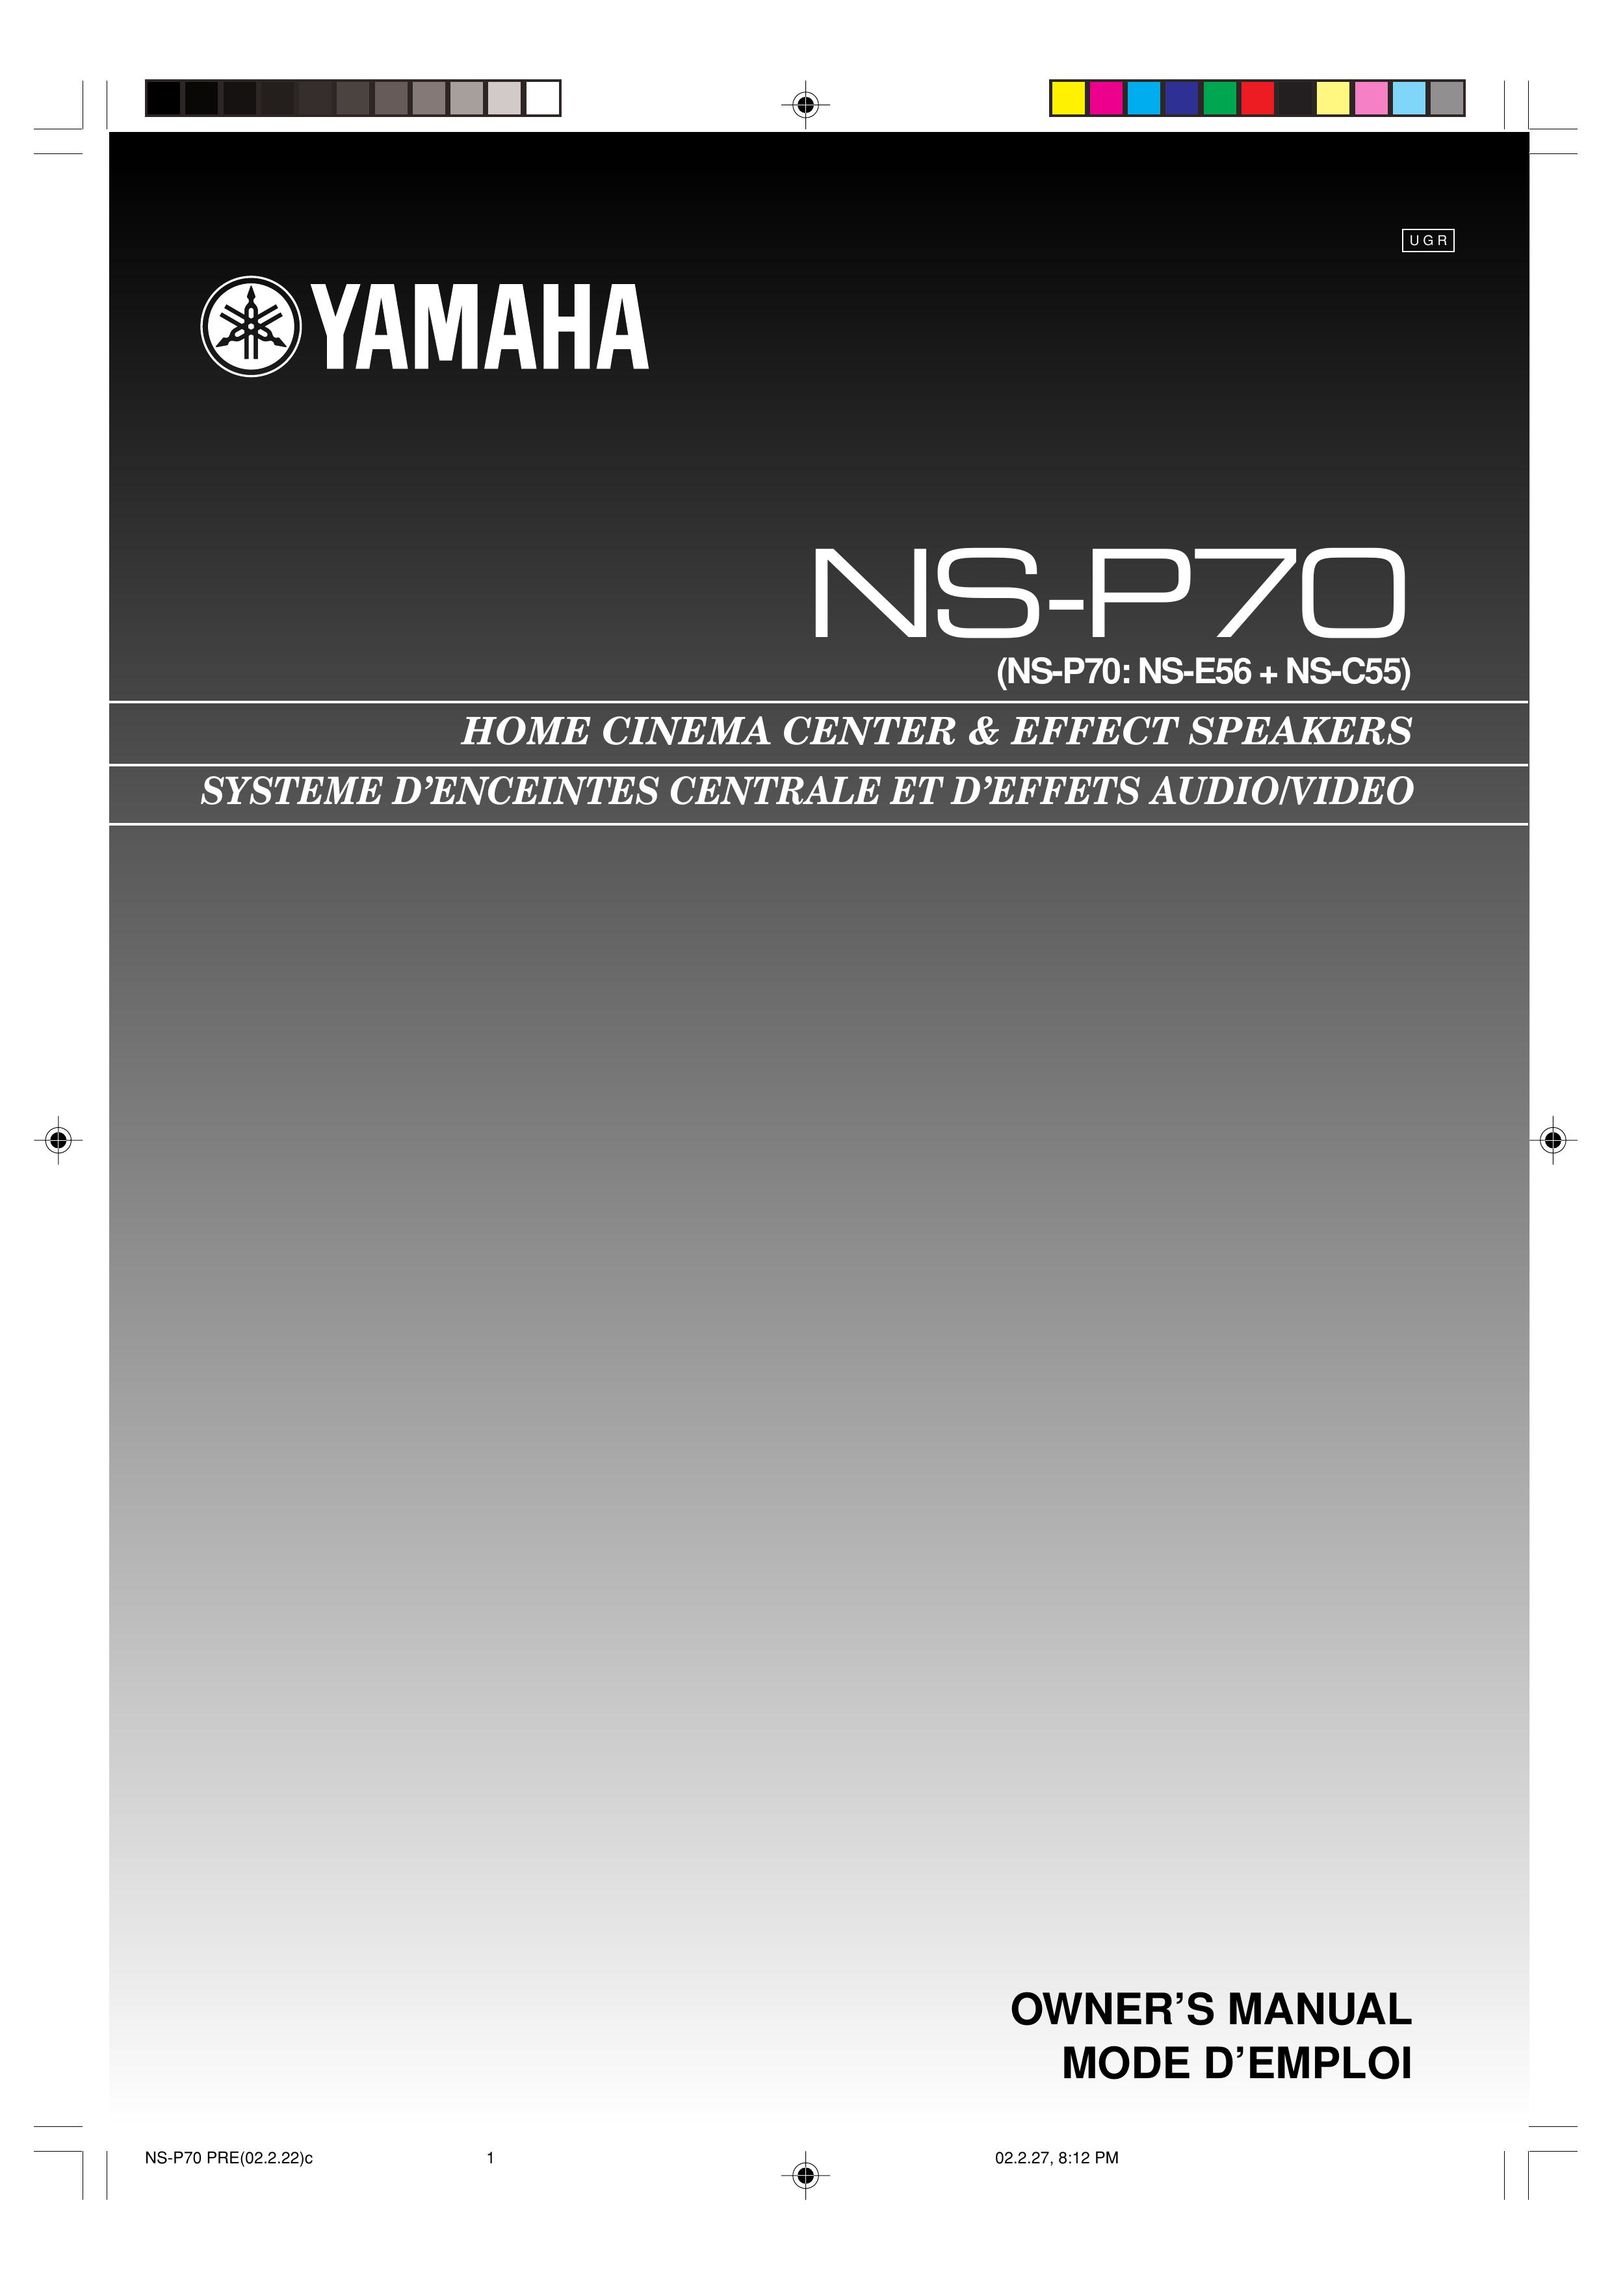 Yamaha NS-E56 Home Theater System User Manual